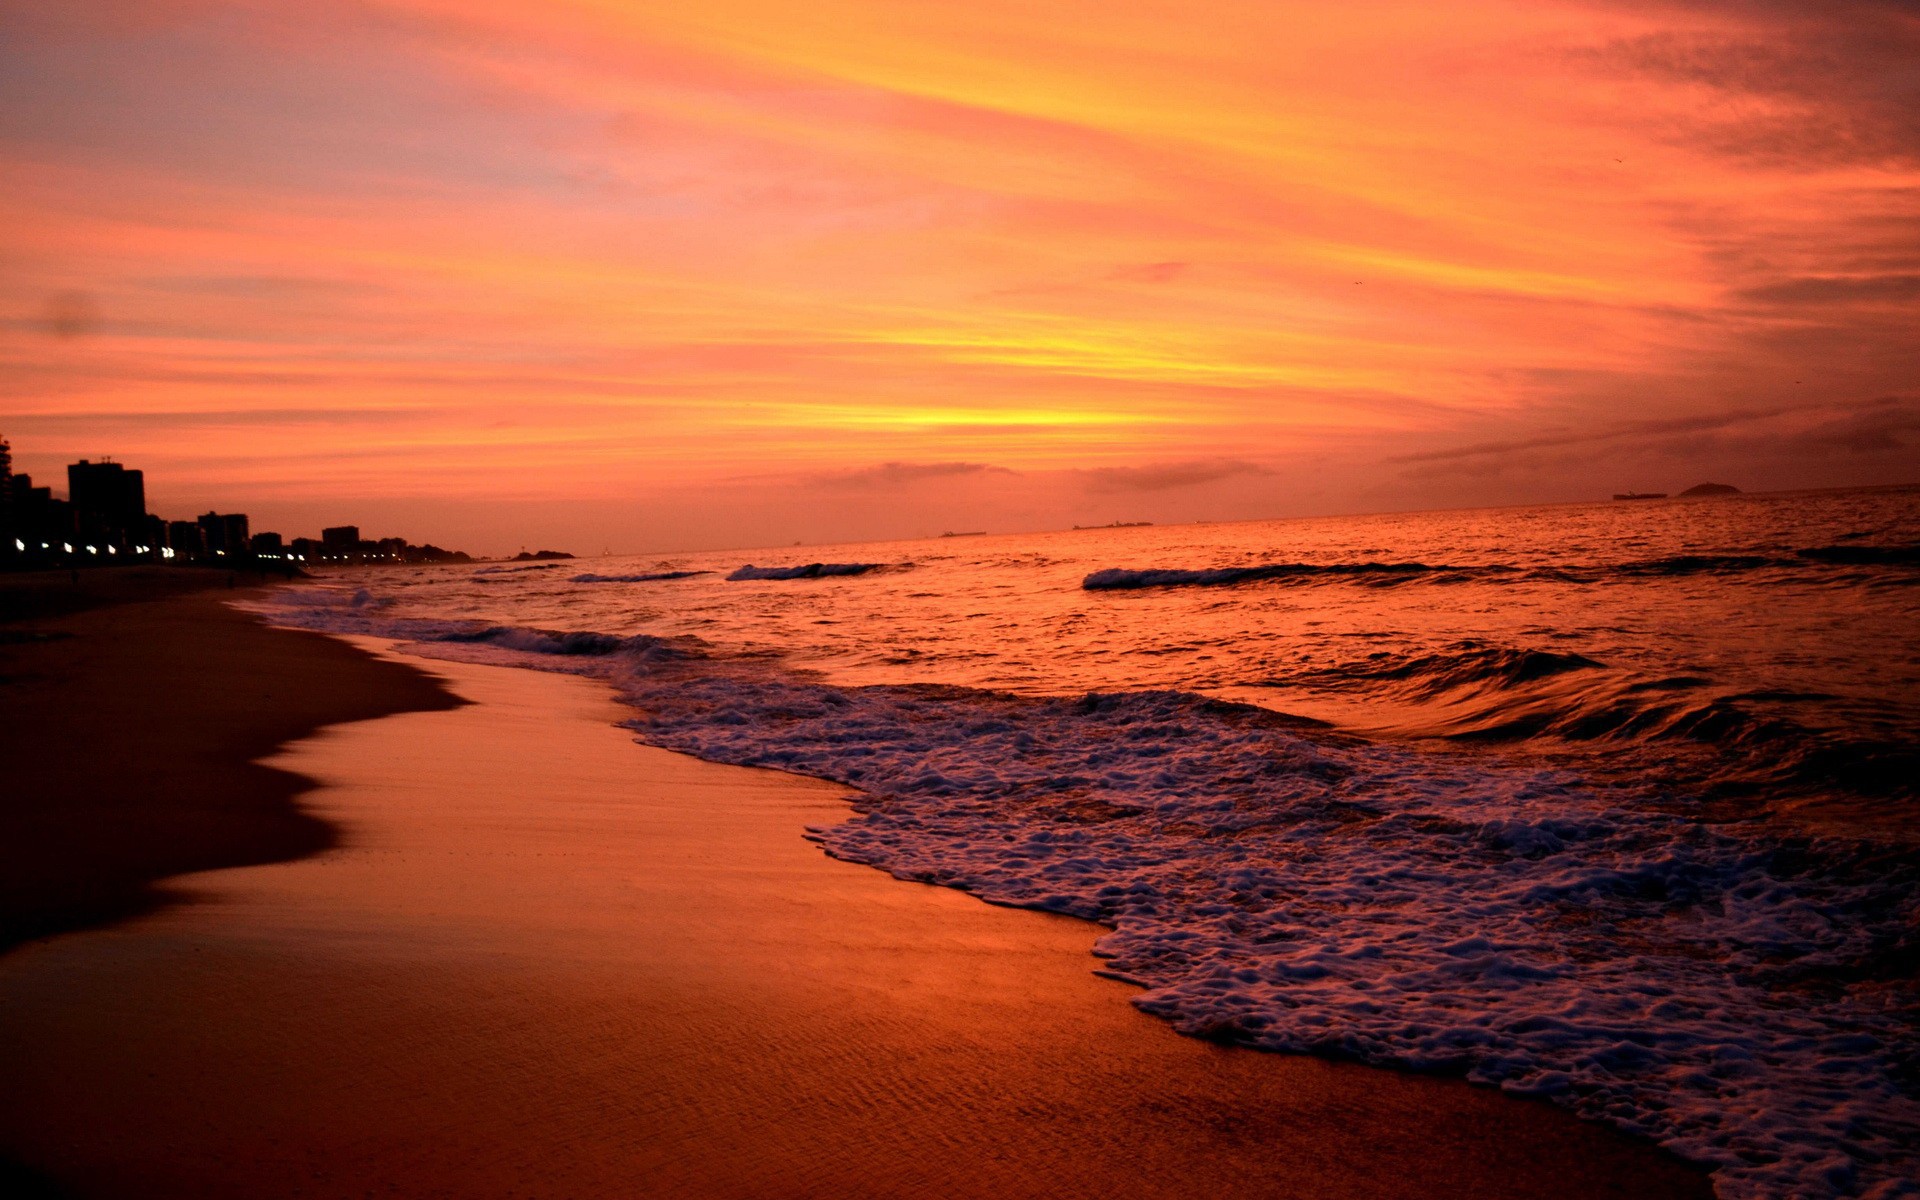 Beaches seaside sunset wallpaper wallpapers and images - wallpapers